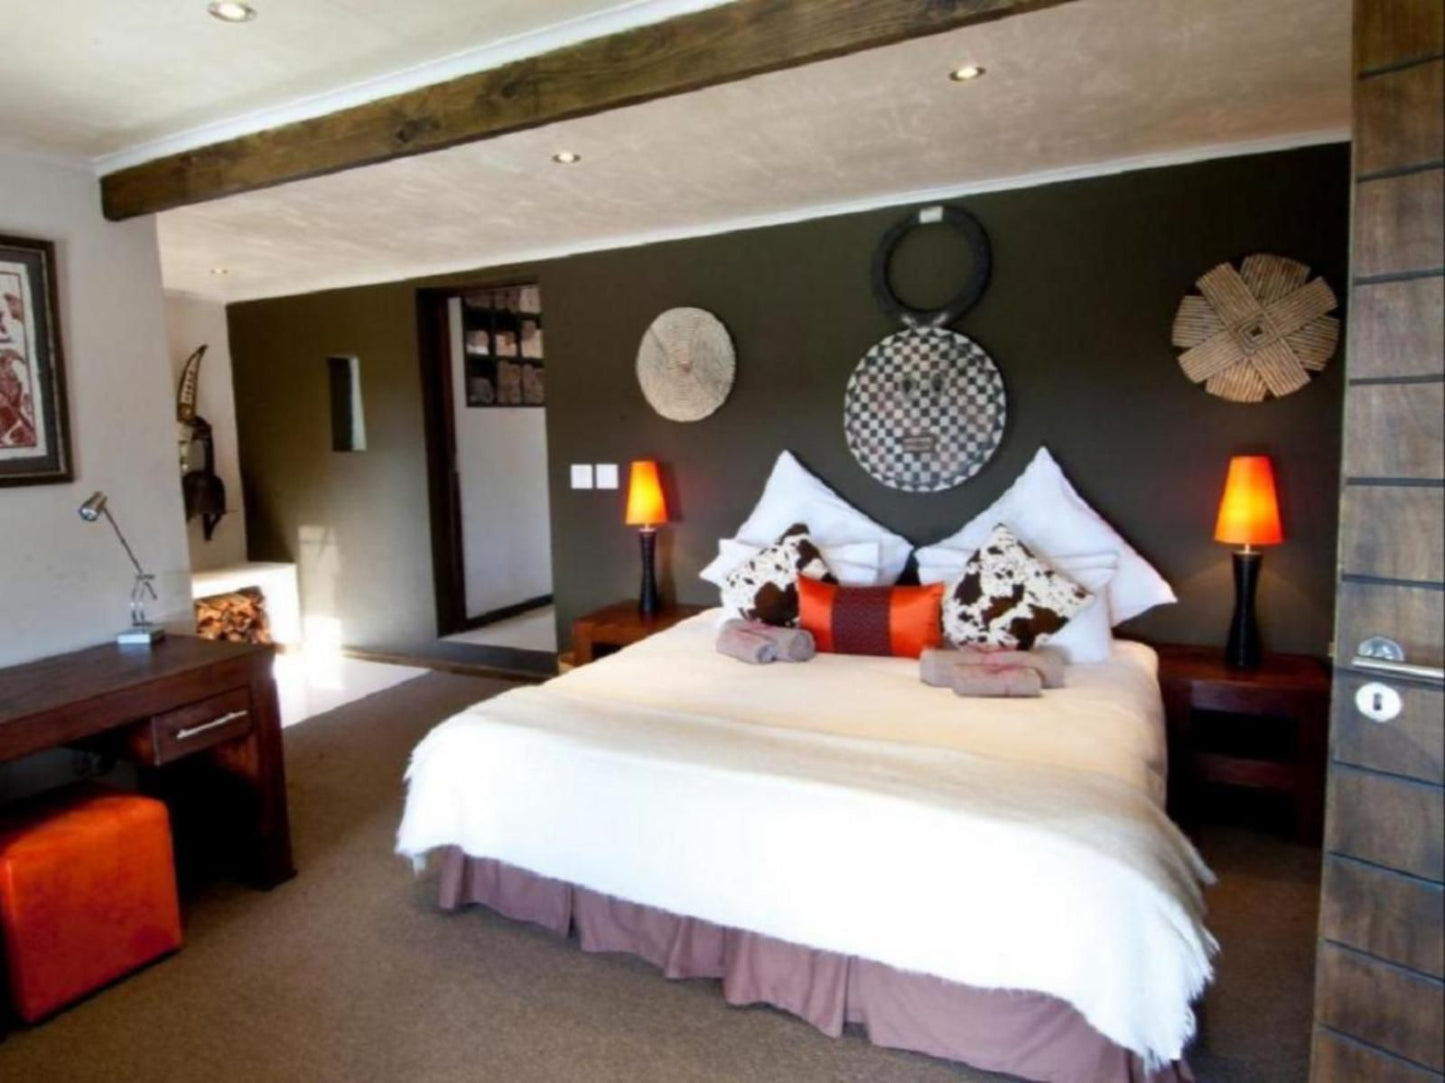 Hog Hollow Country Lodge The Crags Western Cape South Africa Bedroom